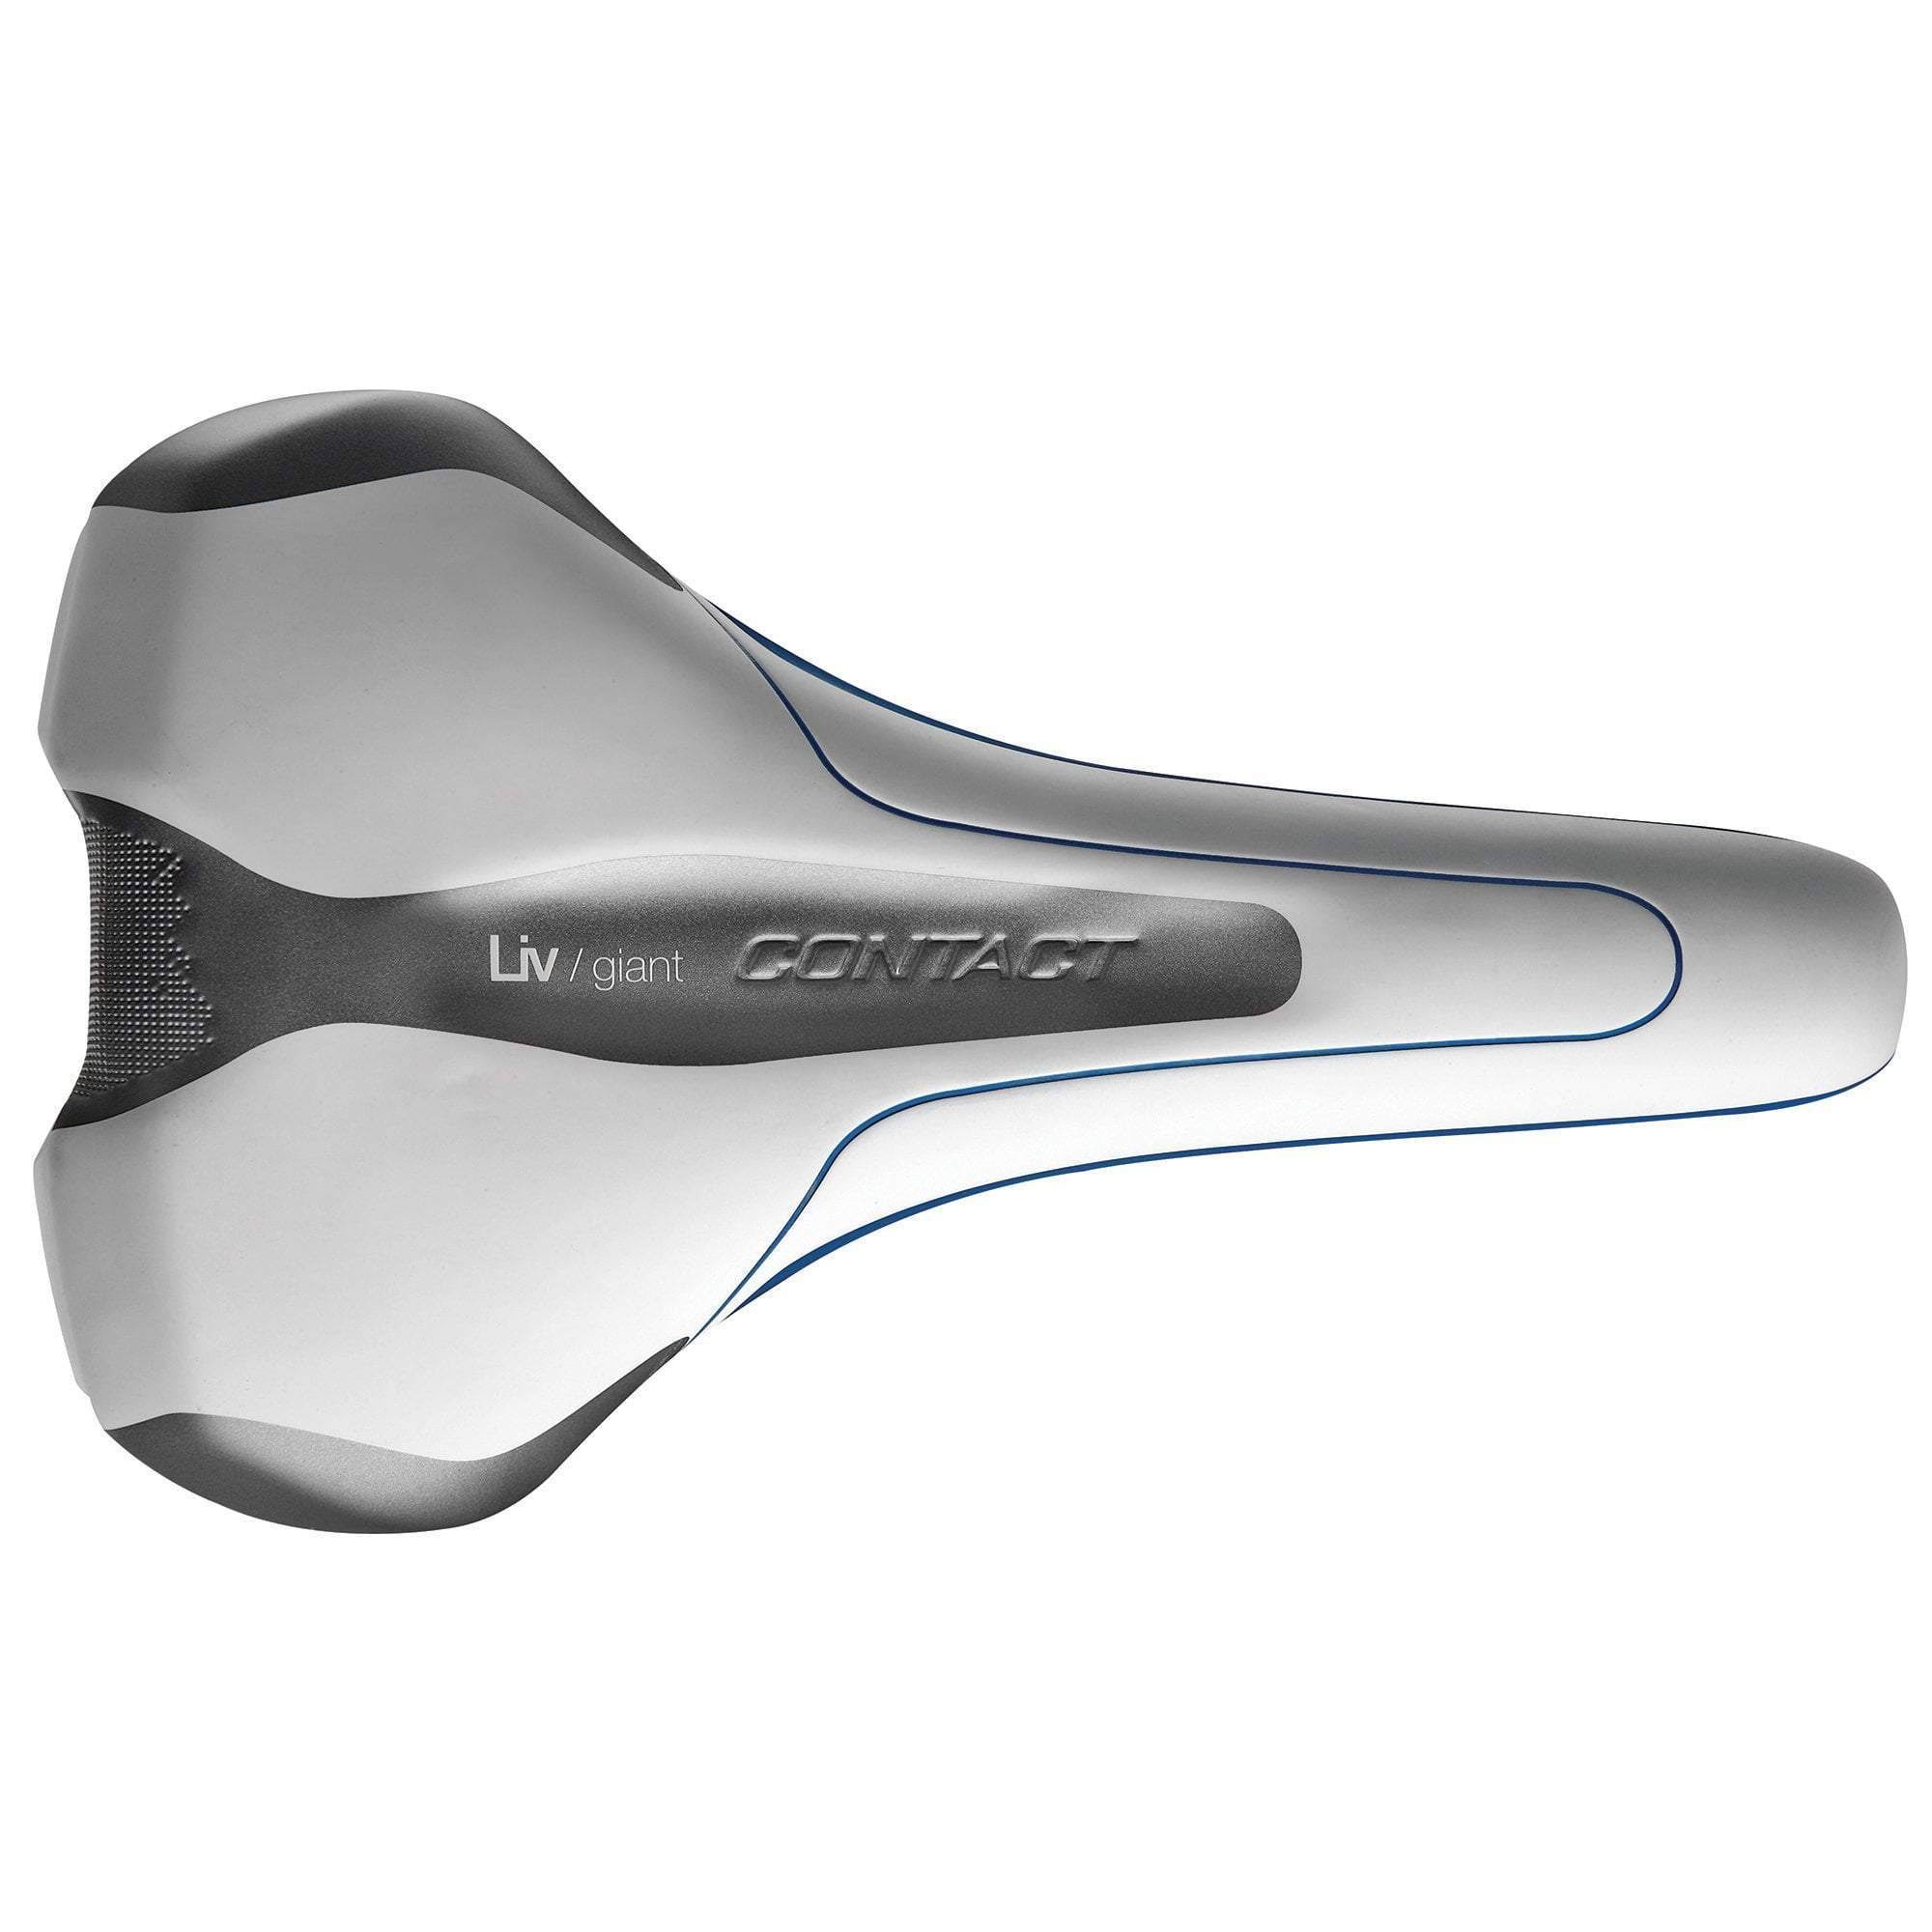 Giant Women's Liv Contact Upright Saddle - White and Blue